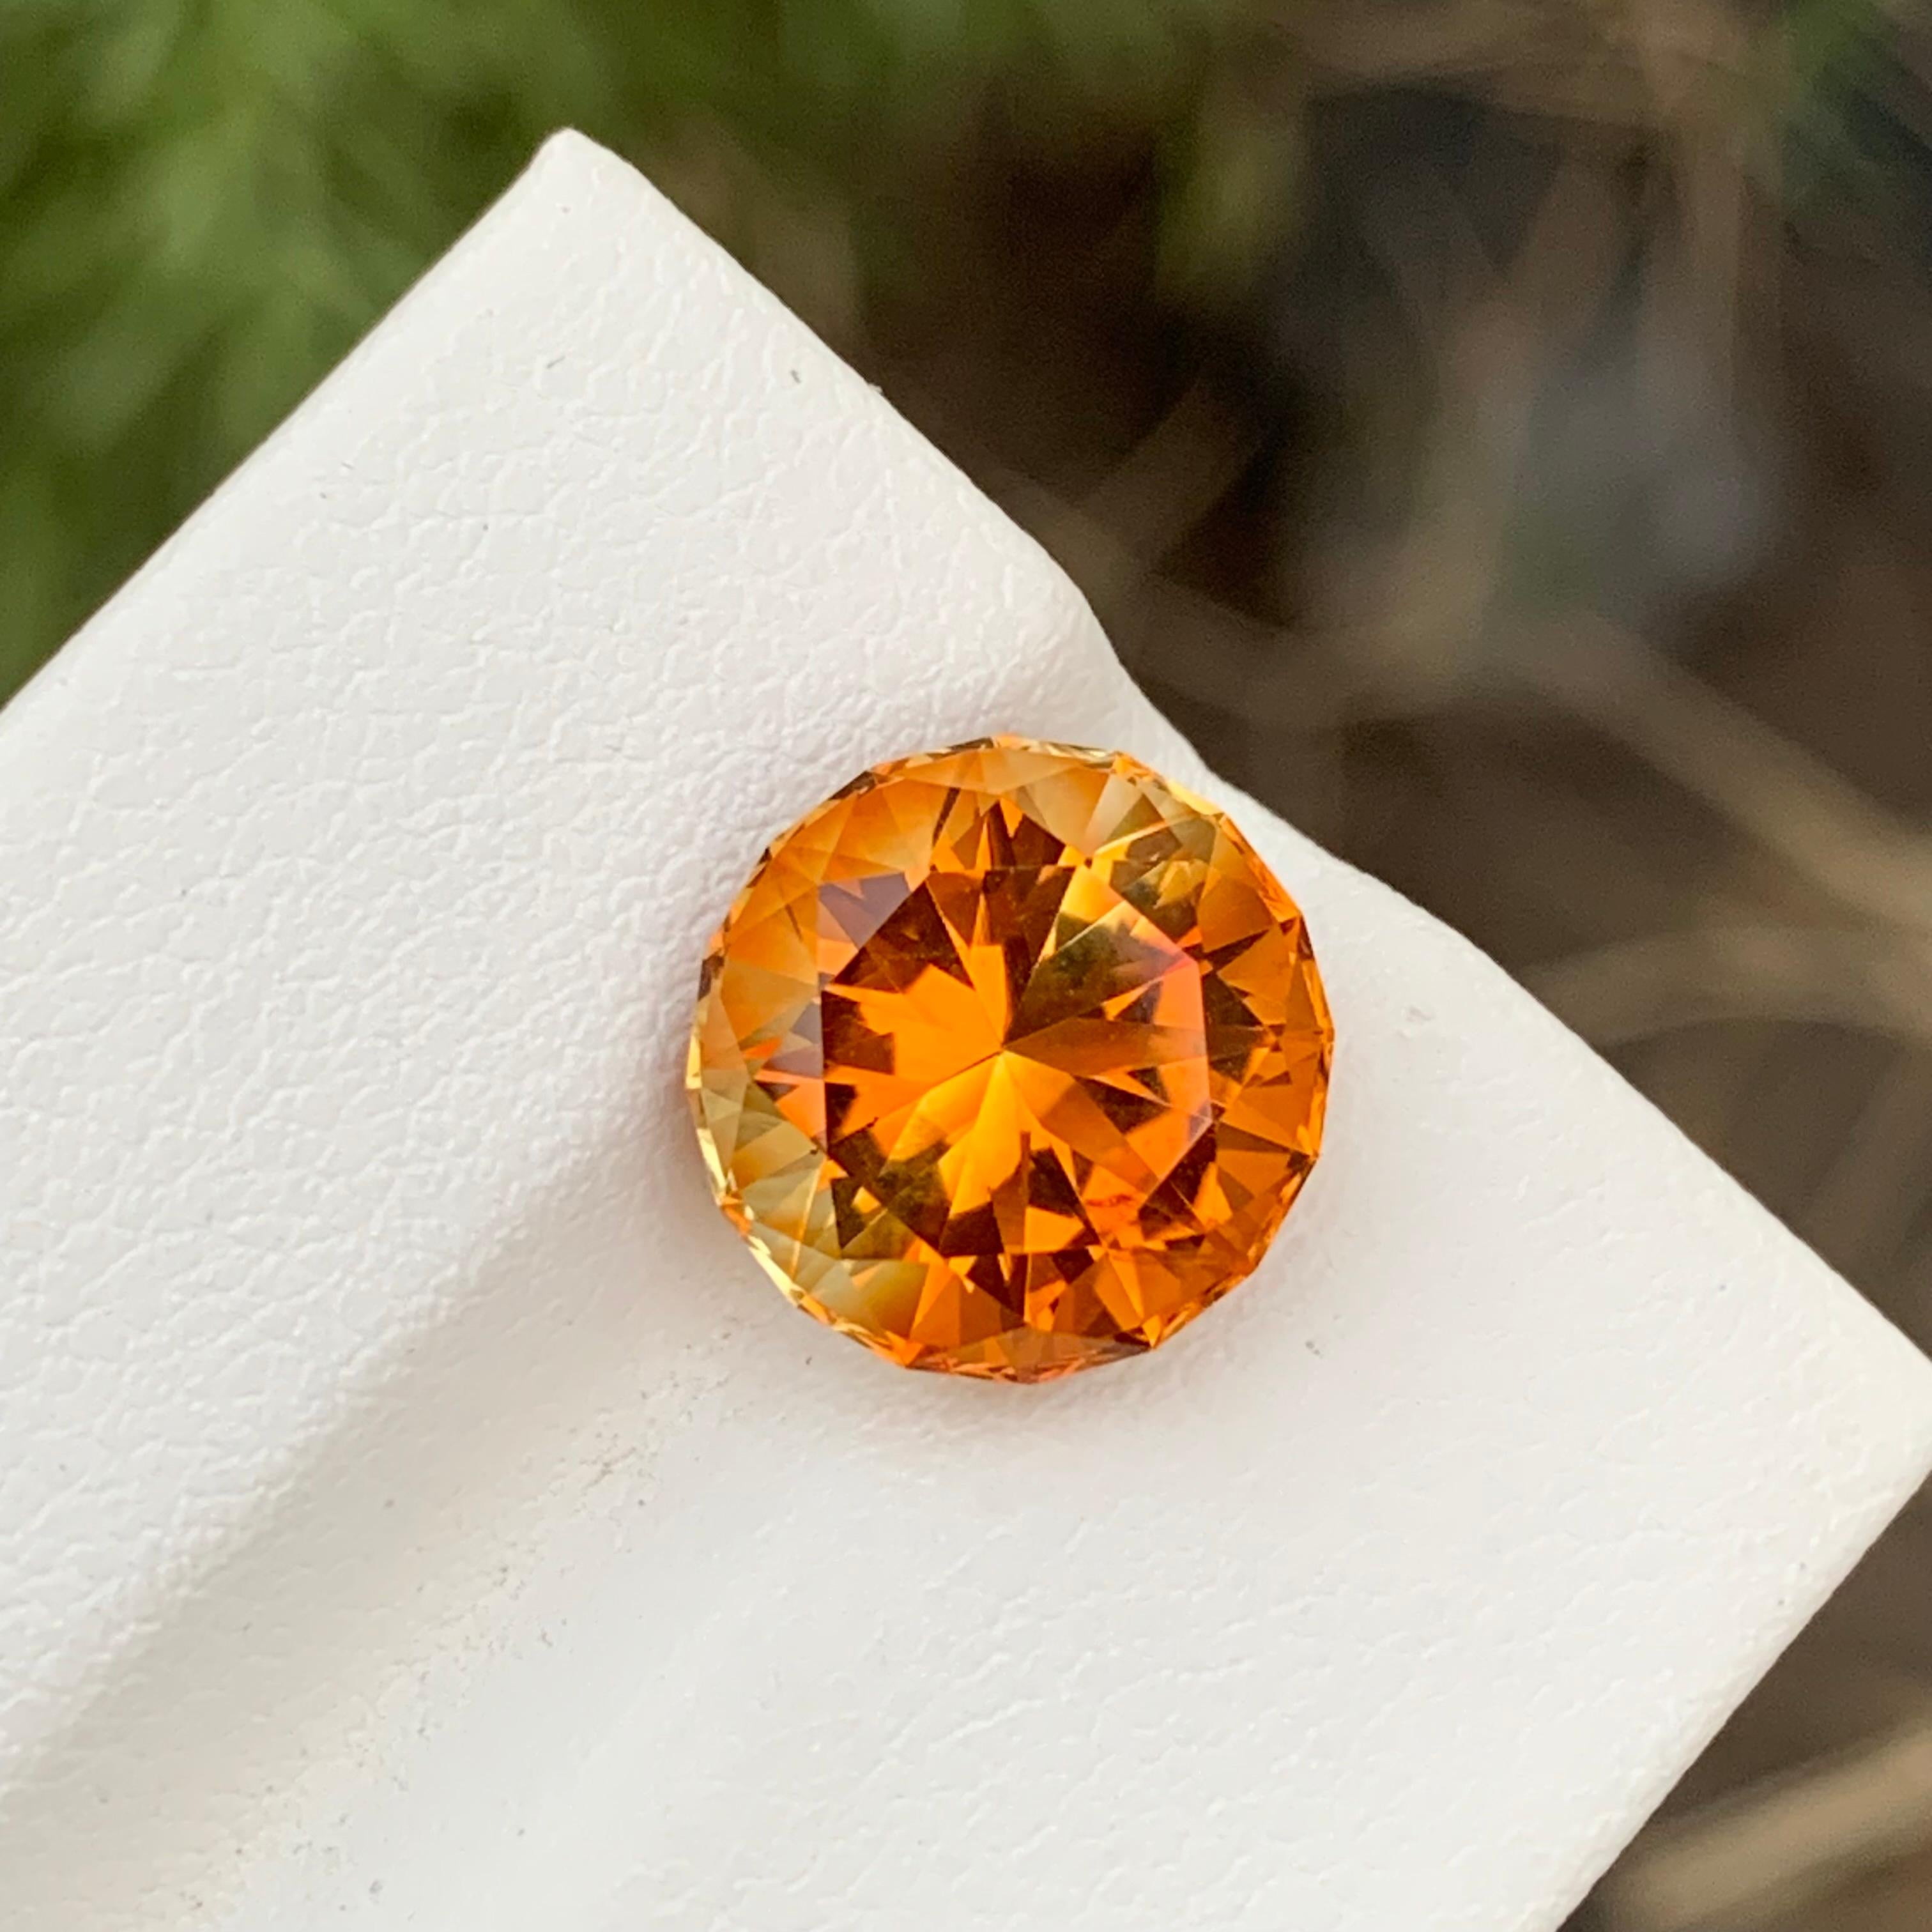 Loose Citrine 
Weight: 5 Carats 
Dimension: 10.9x10.9x7.9 Mm
Origin: Brazil
Shape: Round
Color: Orange
Certificate: On Customer Demand 
Madeira Citrine, a captivating gemstone named after the rich and warm tones reminiscent of the Madeira wine, is